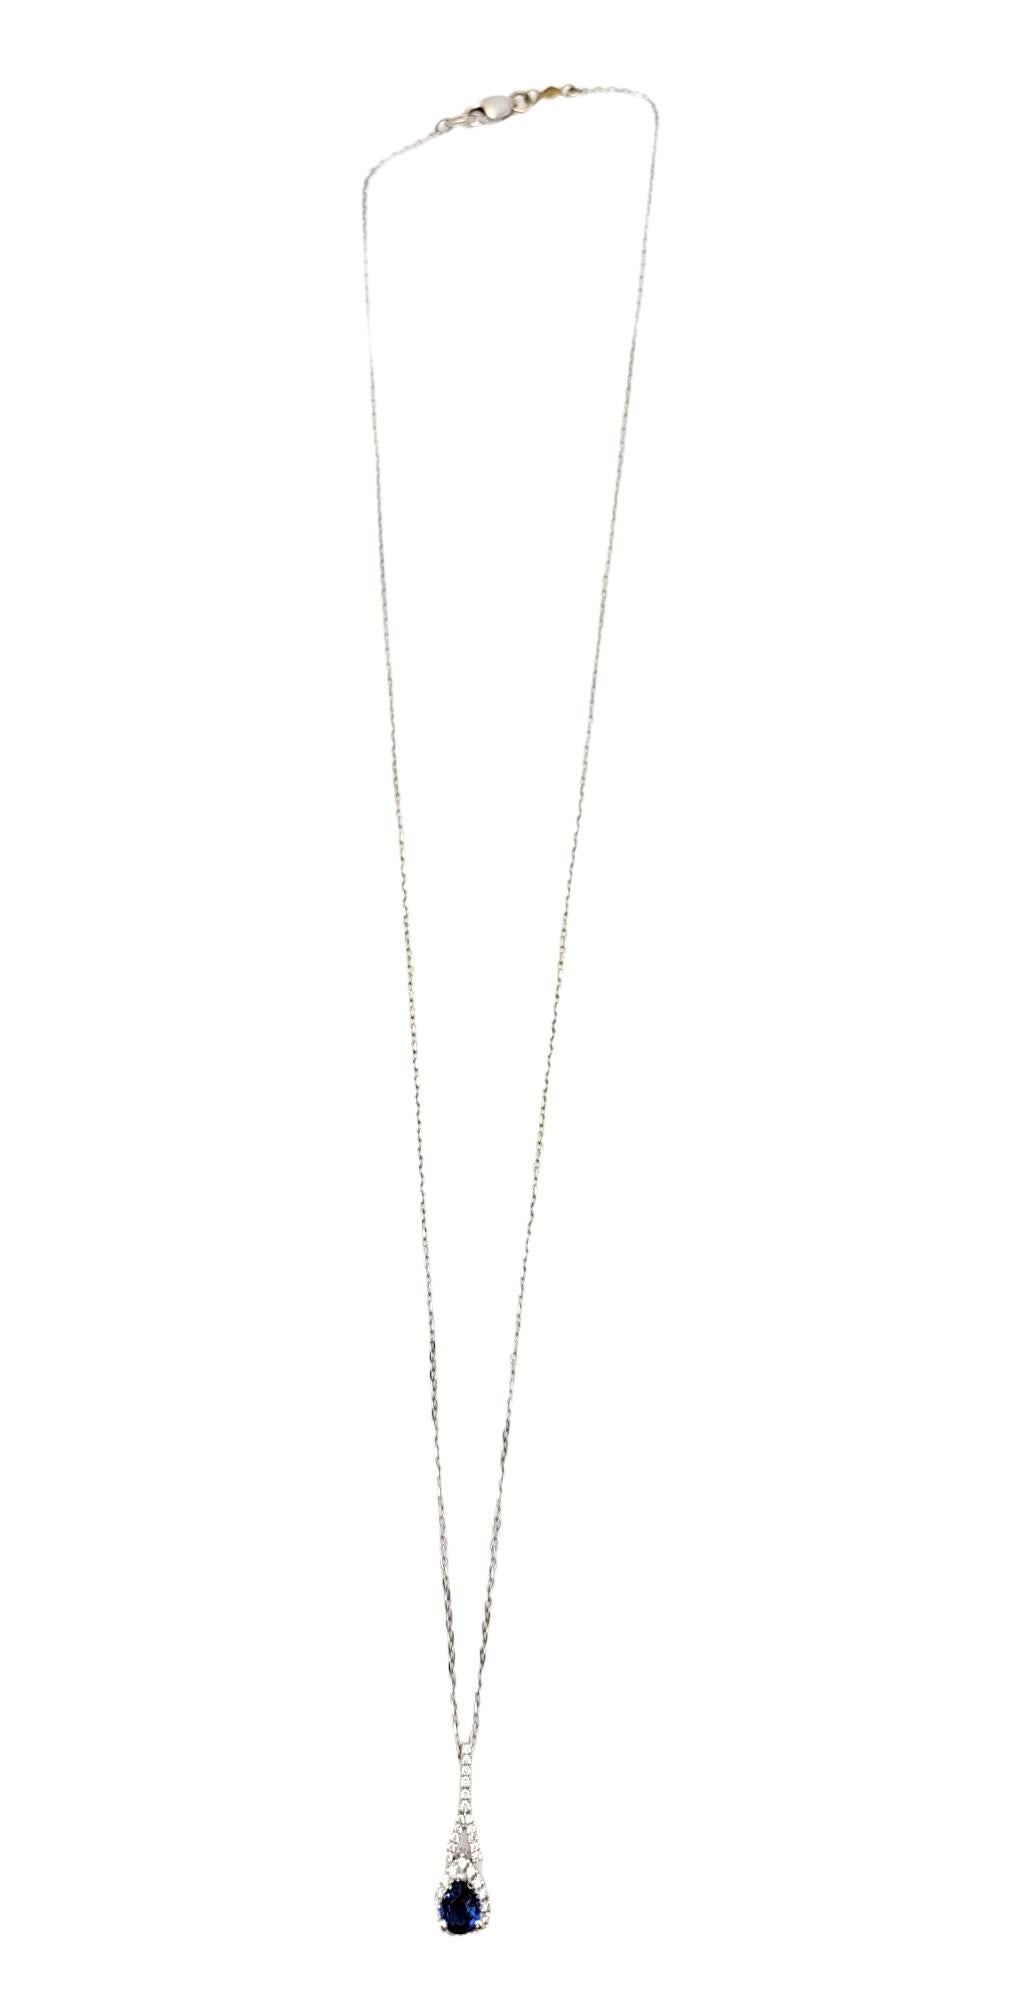 This sparkling diamond and sapphire pendant necklace is stunningly simple, yet undeniably beautiful. The delicate chain and dainty pendant still offer big sparkle and glamour, making this piece absolutely radiate on the neck. 

Metal: 18K White Gold